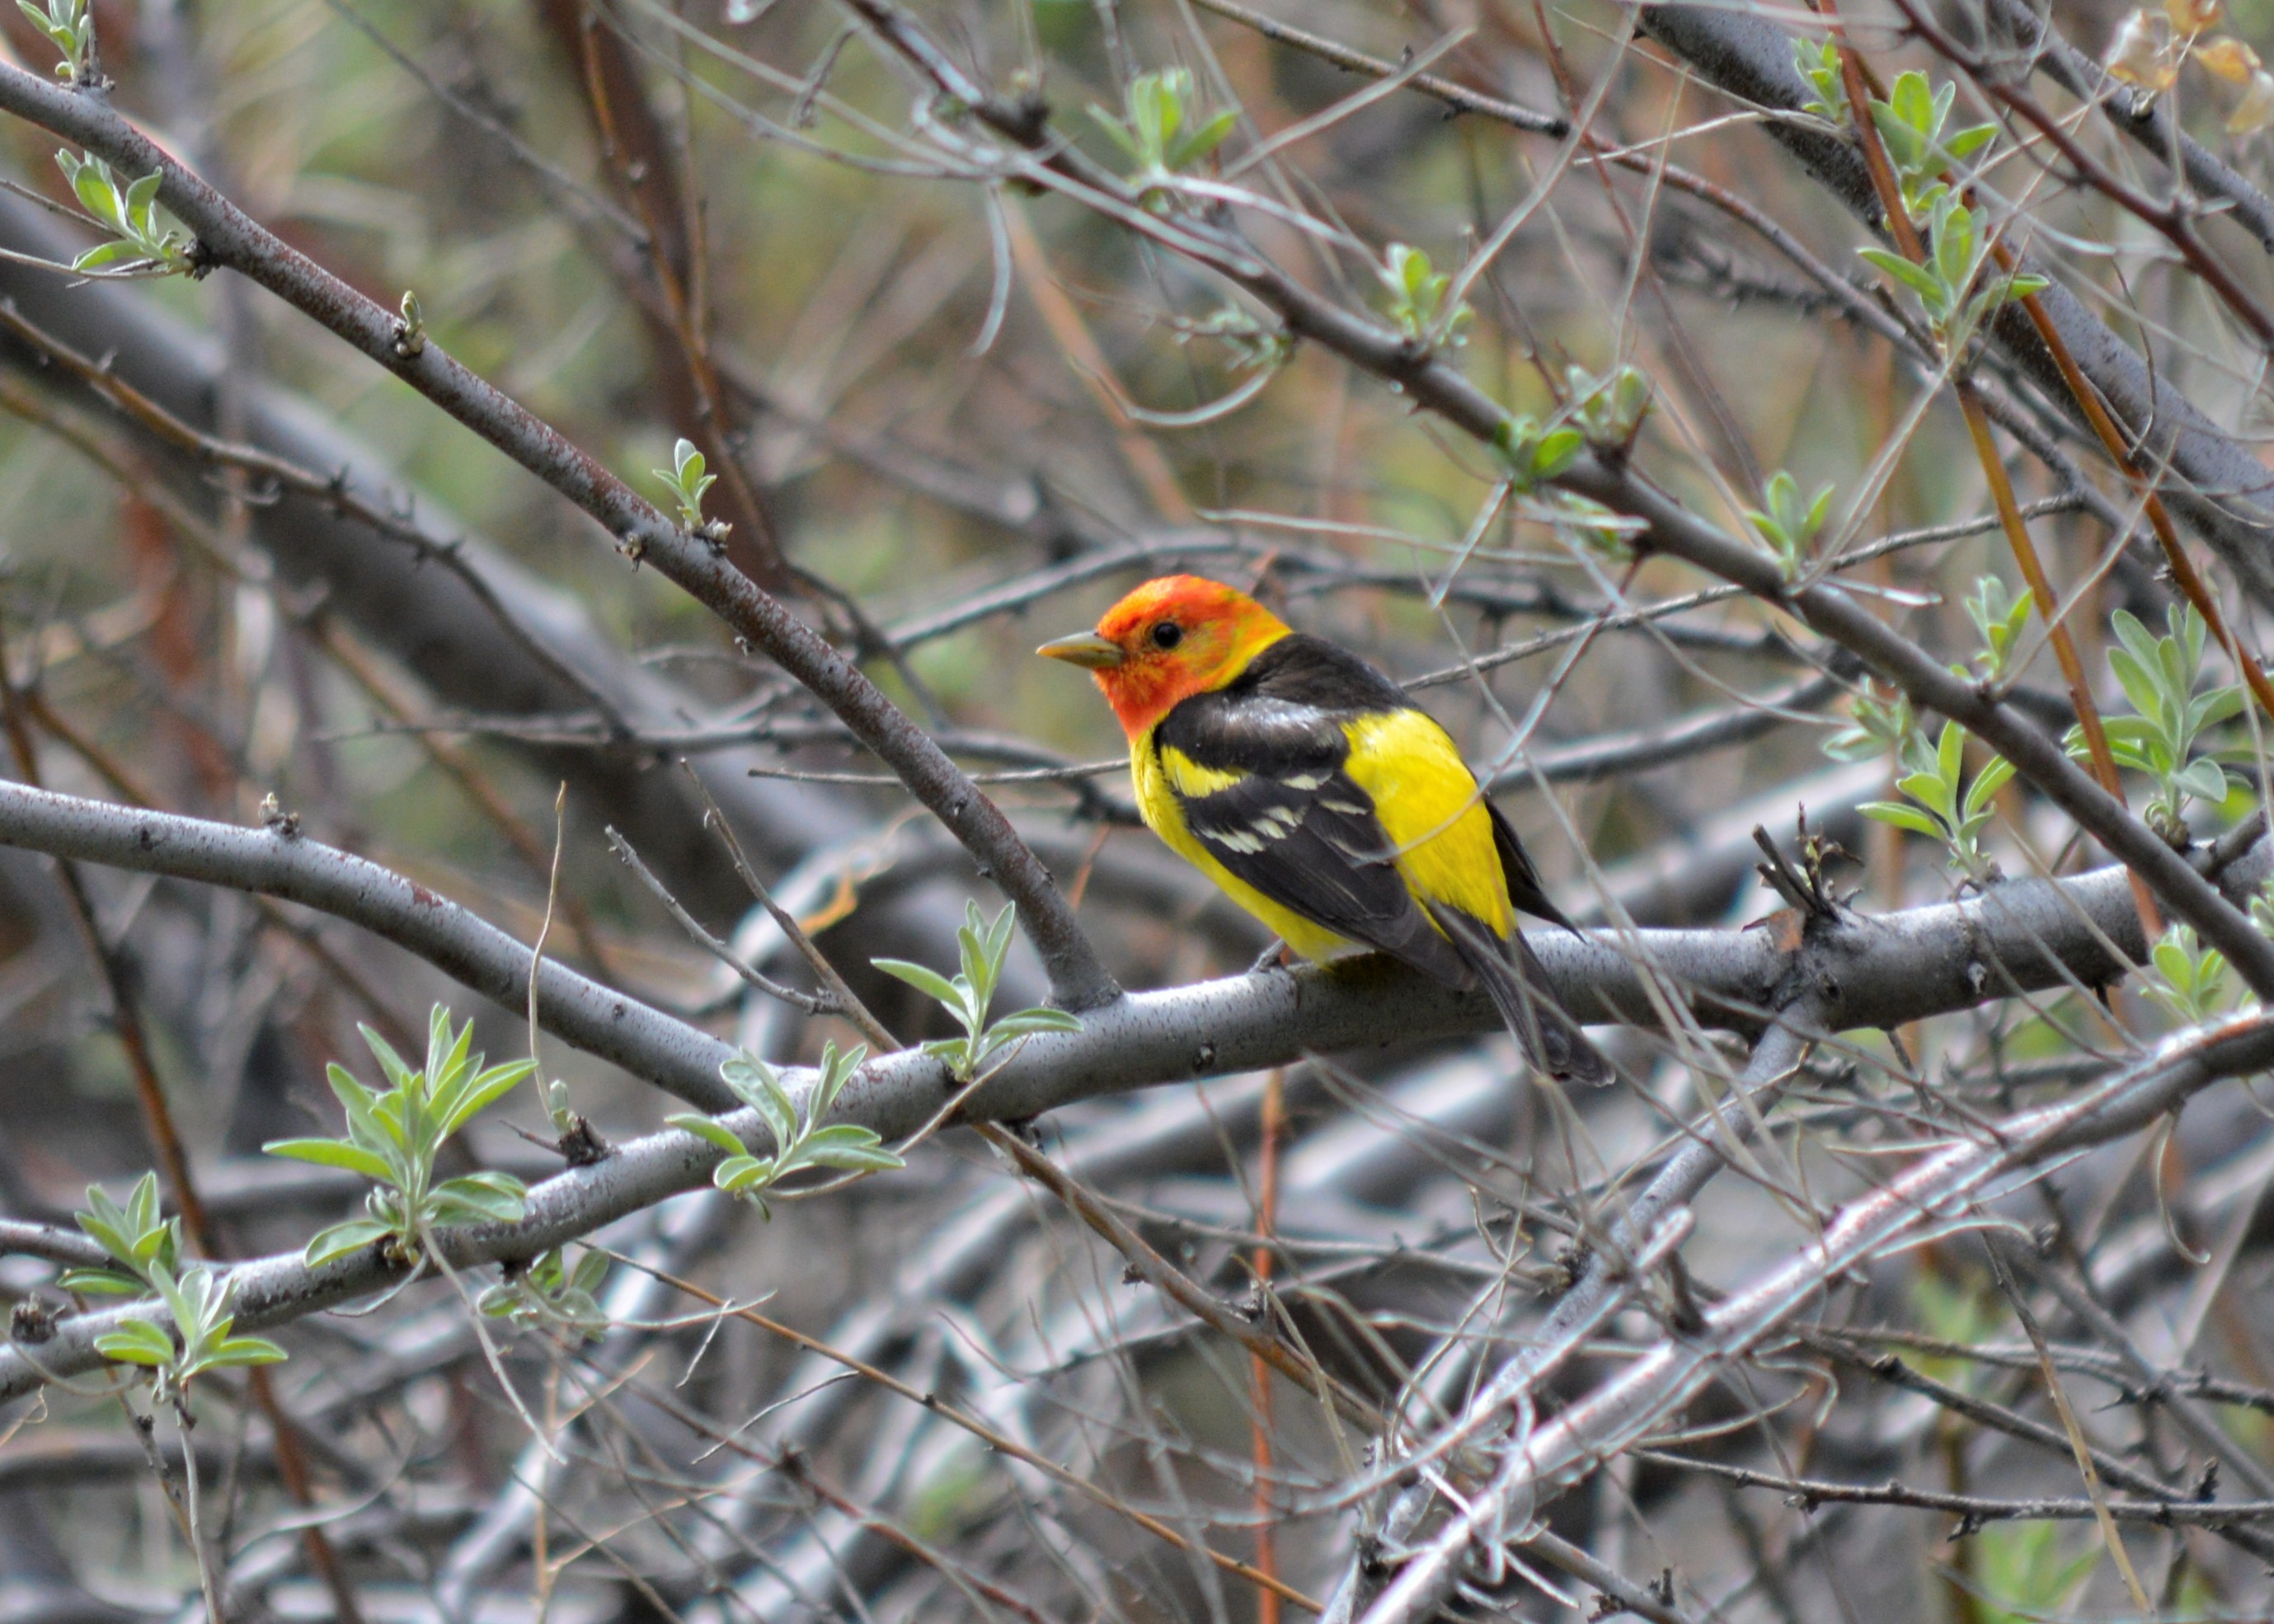 a brightly colored songbird with striking red head, yellow body, black wings